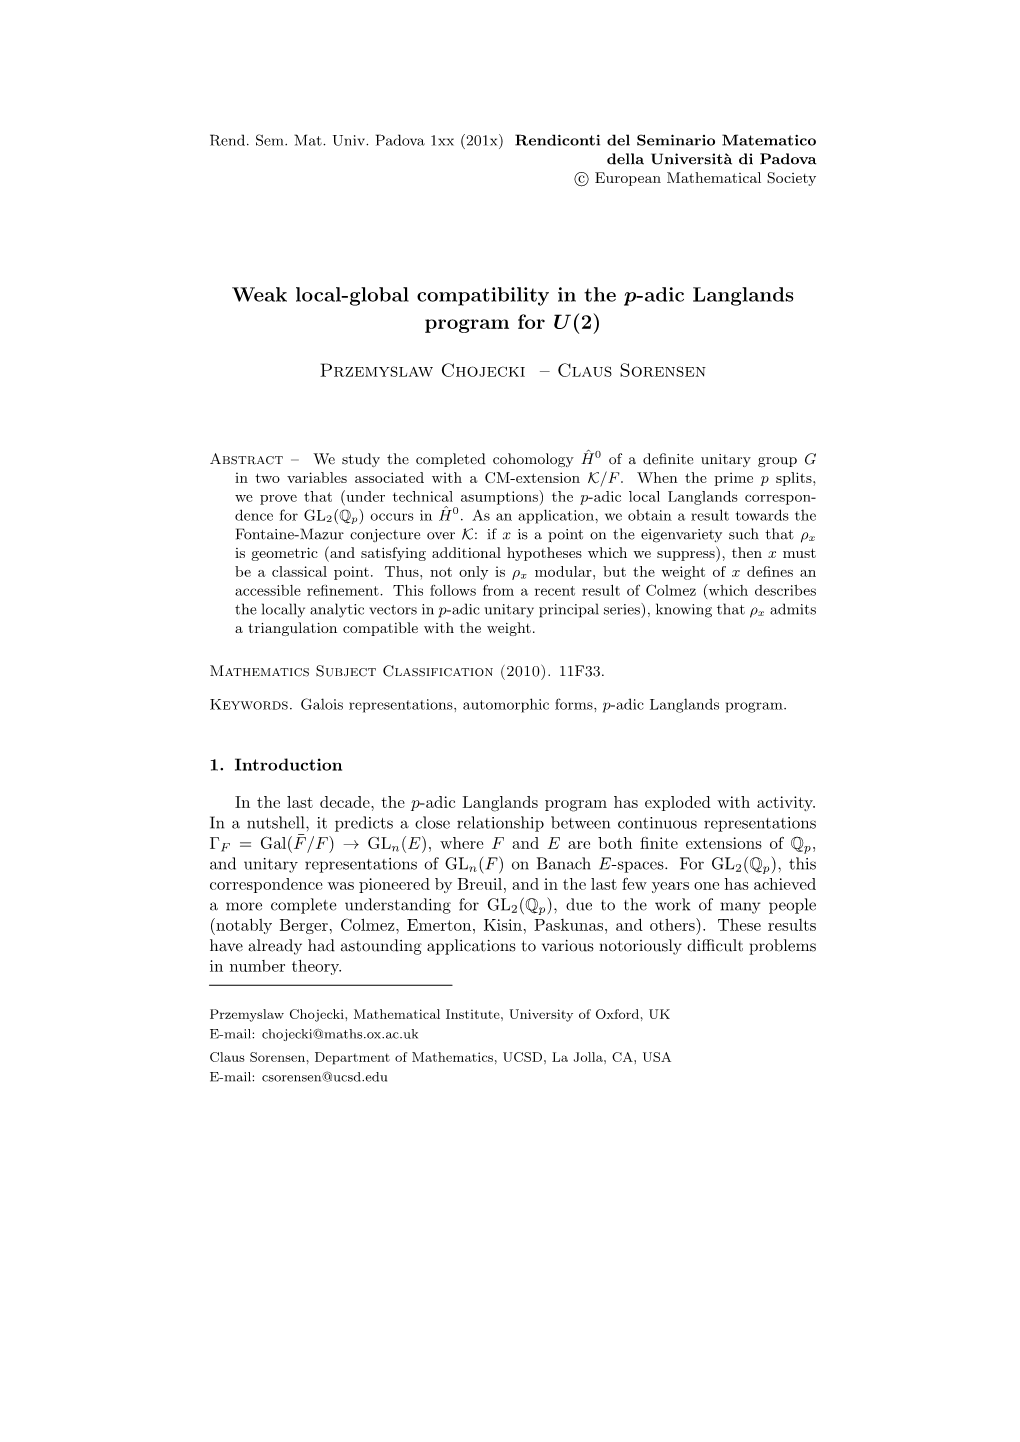 Weak Local-Global Compatibility in the P-Adic Langlands Program for U(2)